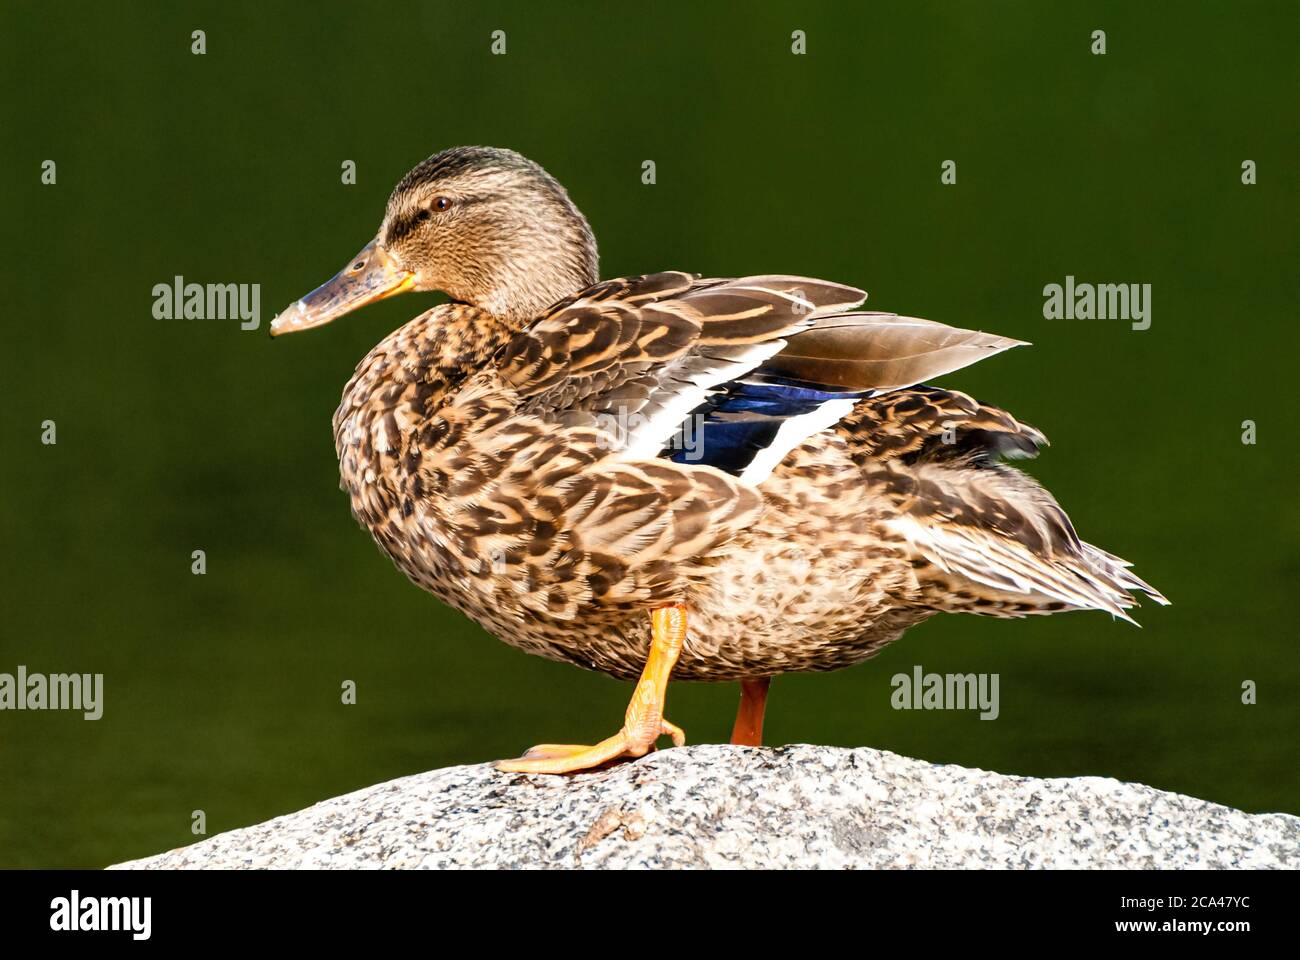 The Mallard (Anas platyrhynchos) is a dabbling duck that breeds throughout the temperate and subtropical Americas, Eurasia, and North Africa Stock Photo